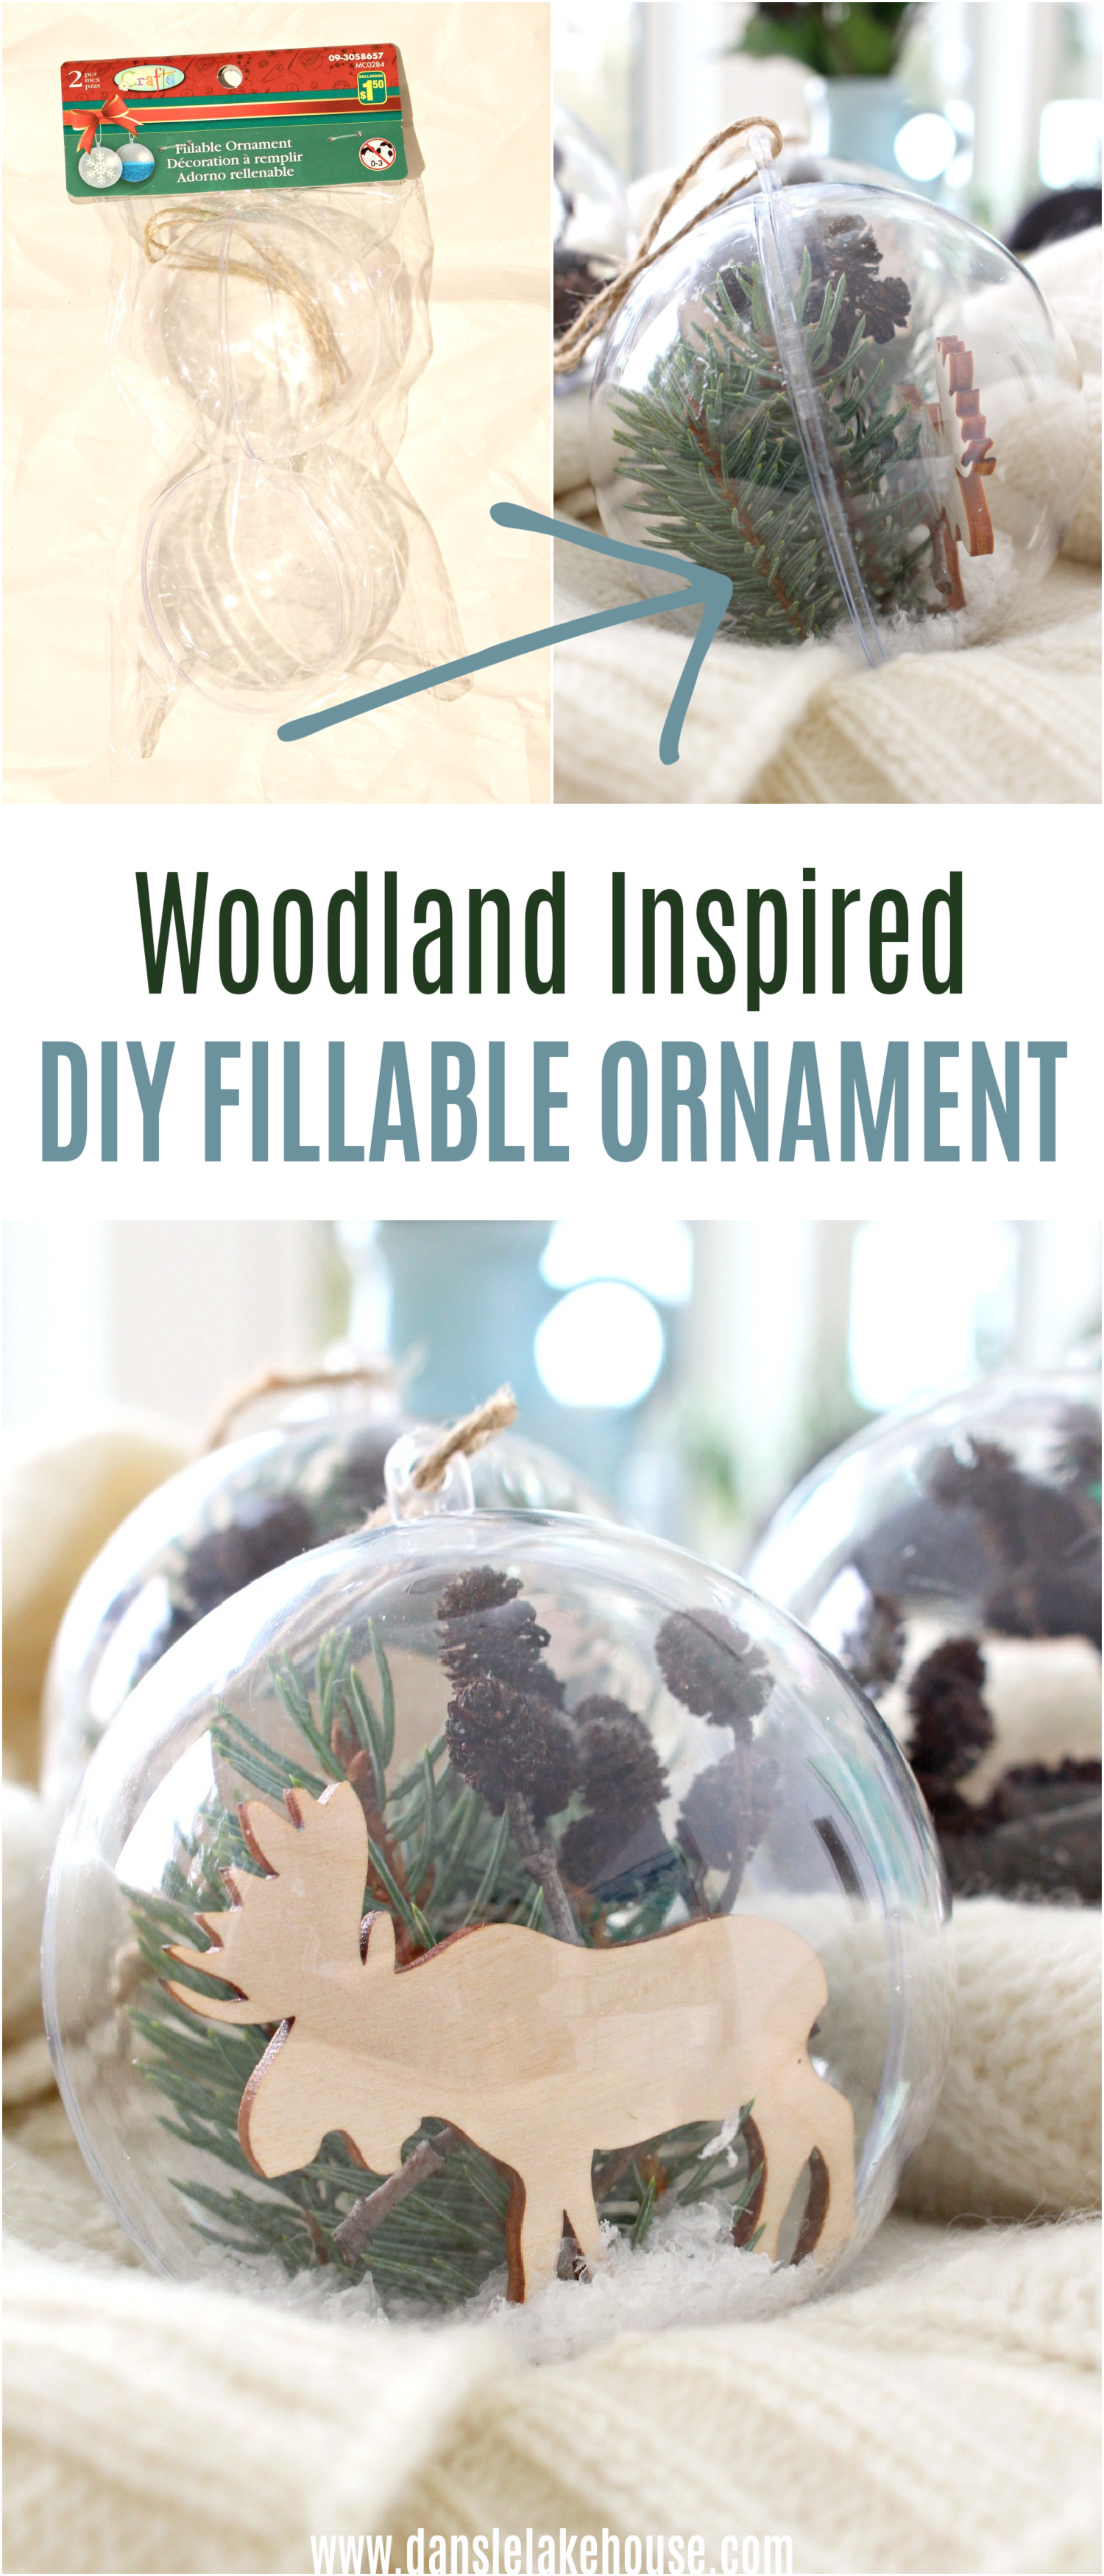 Woodland Inspired DIY Fillable Ornament